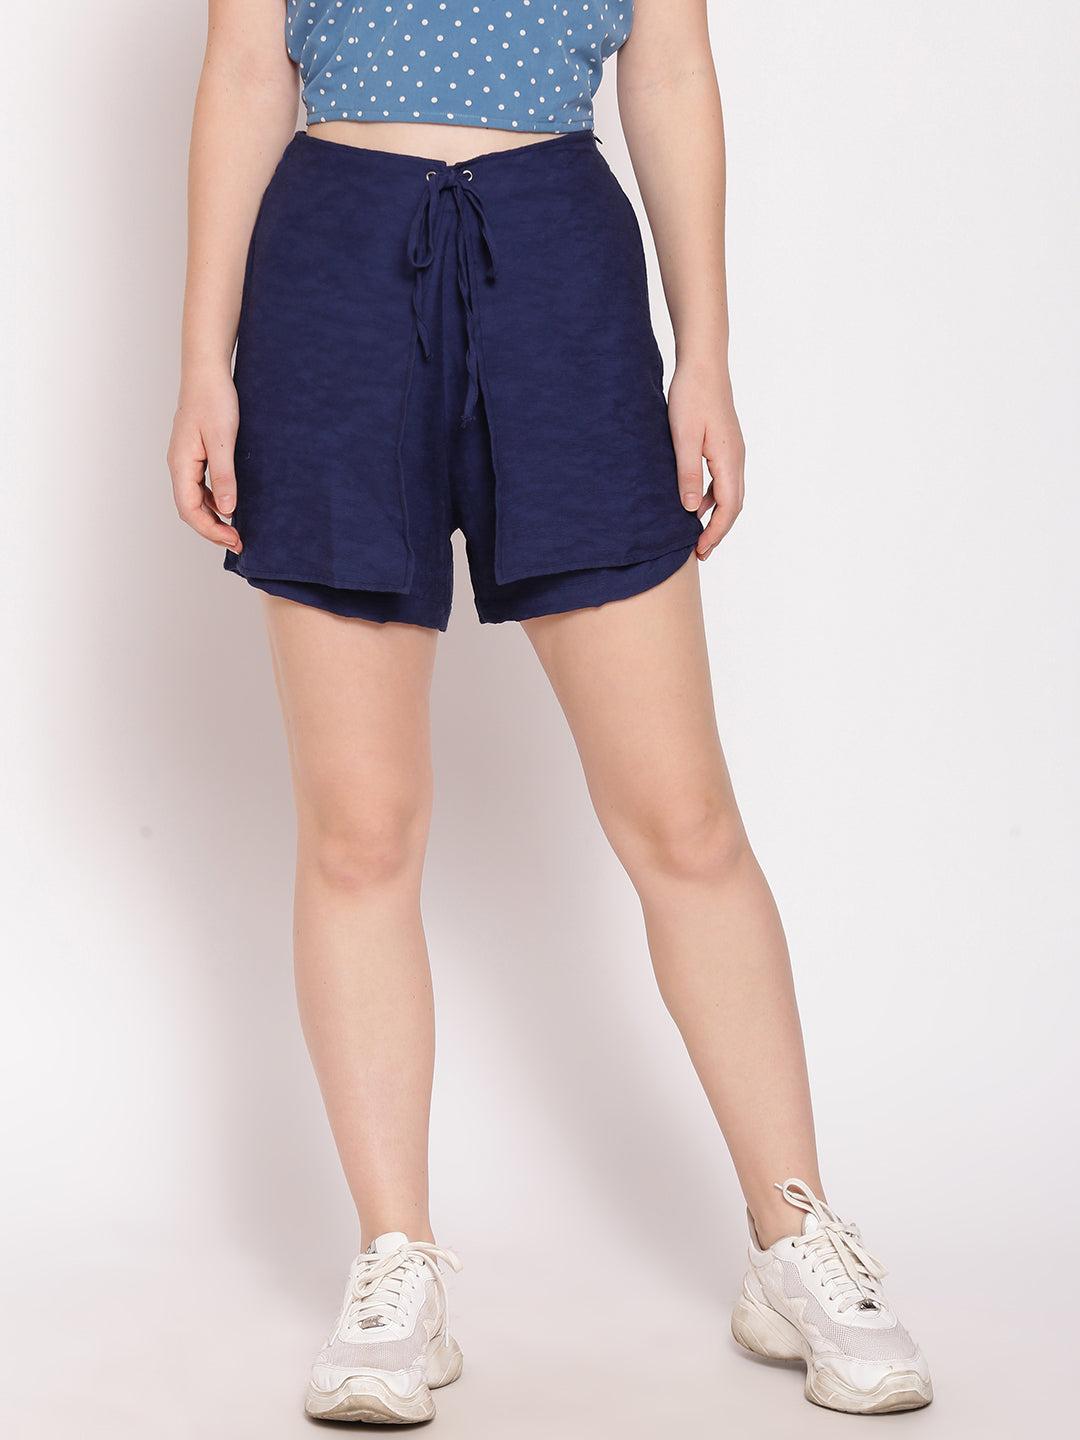 blue solid layered shorts for women